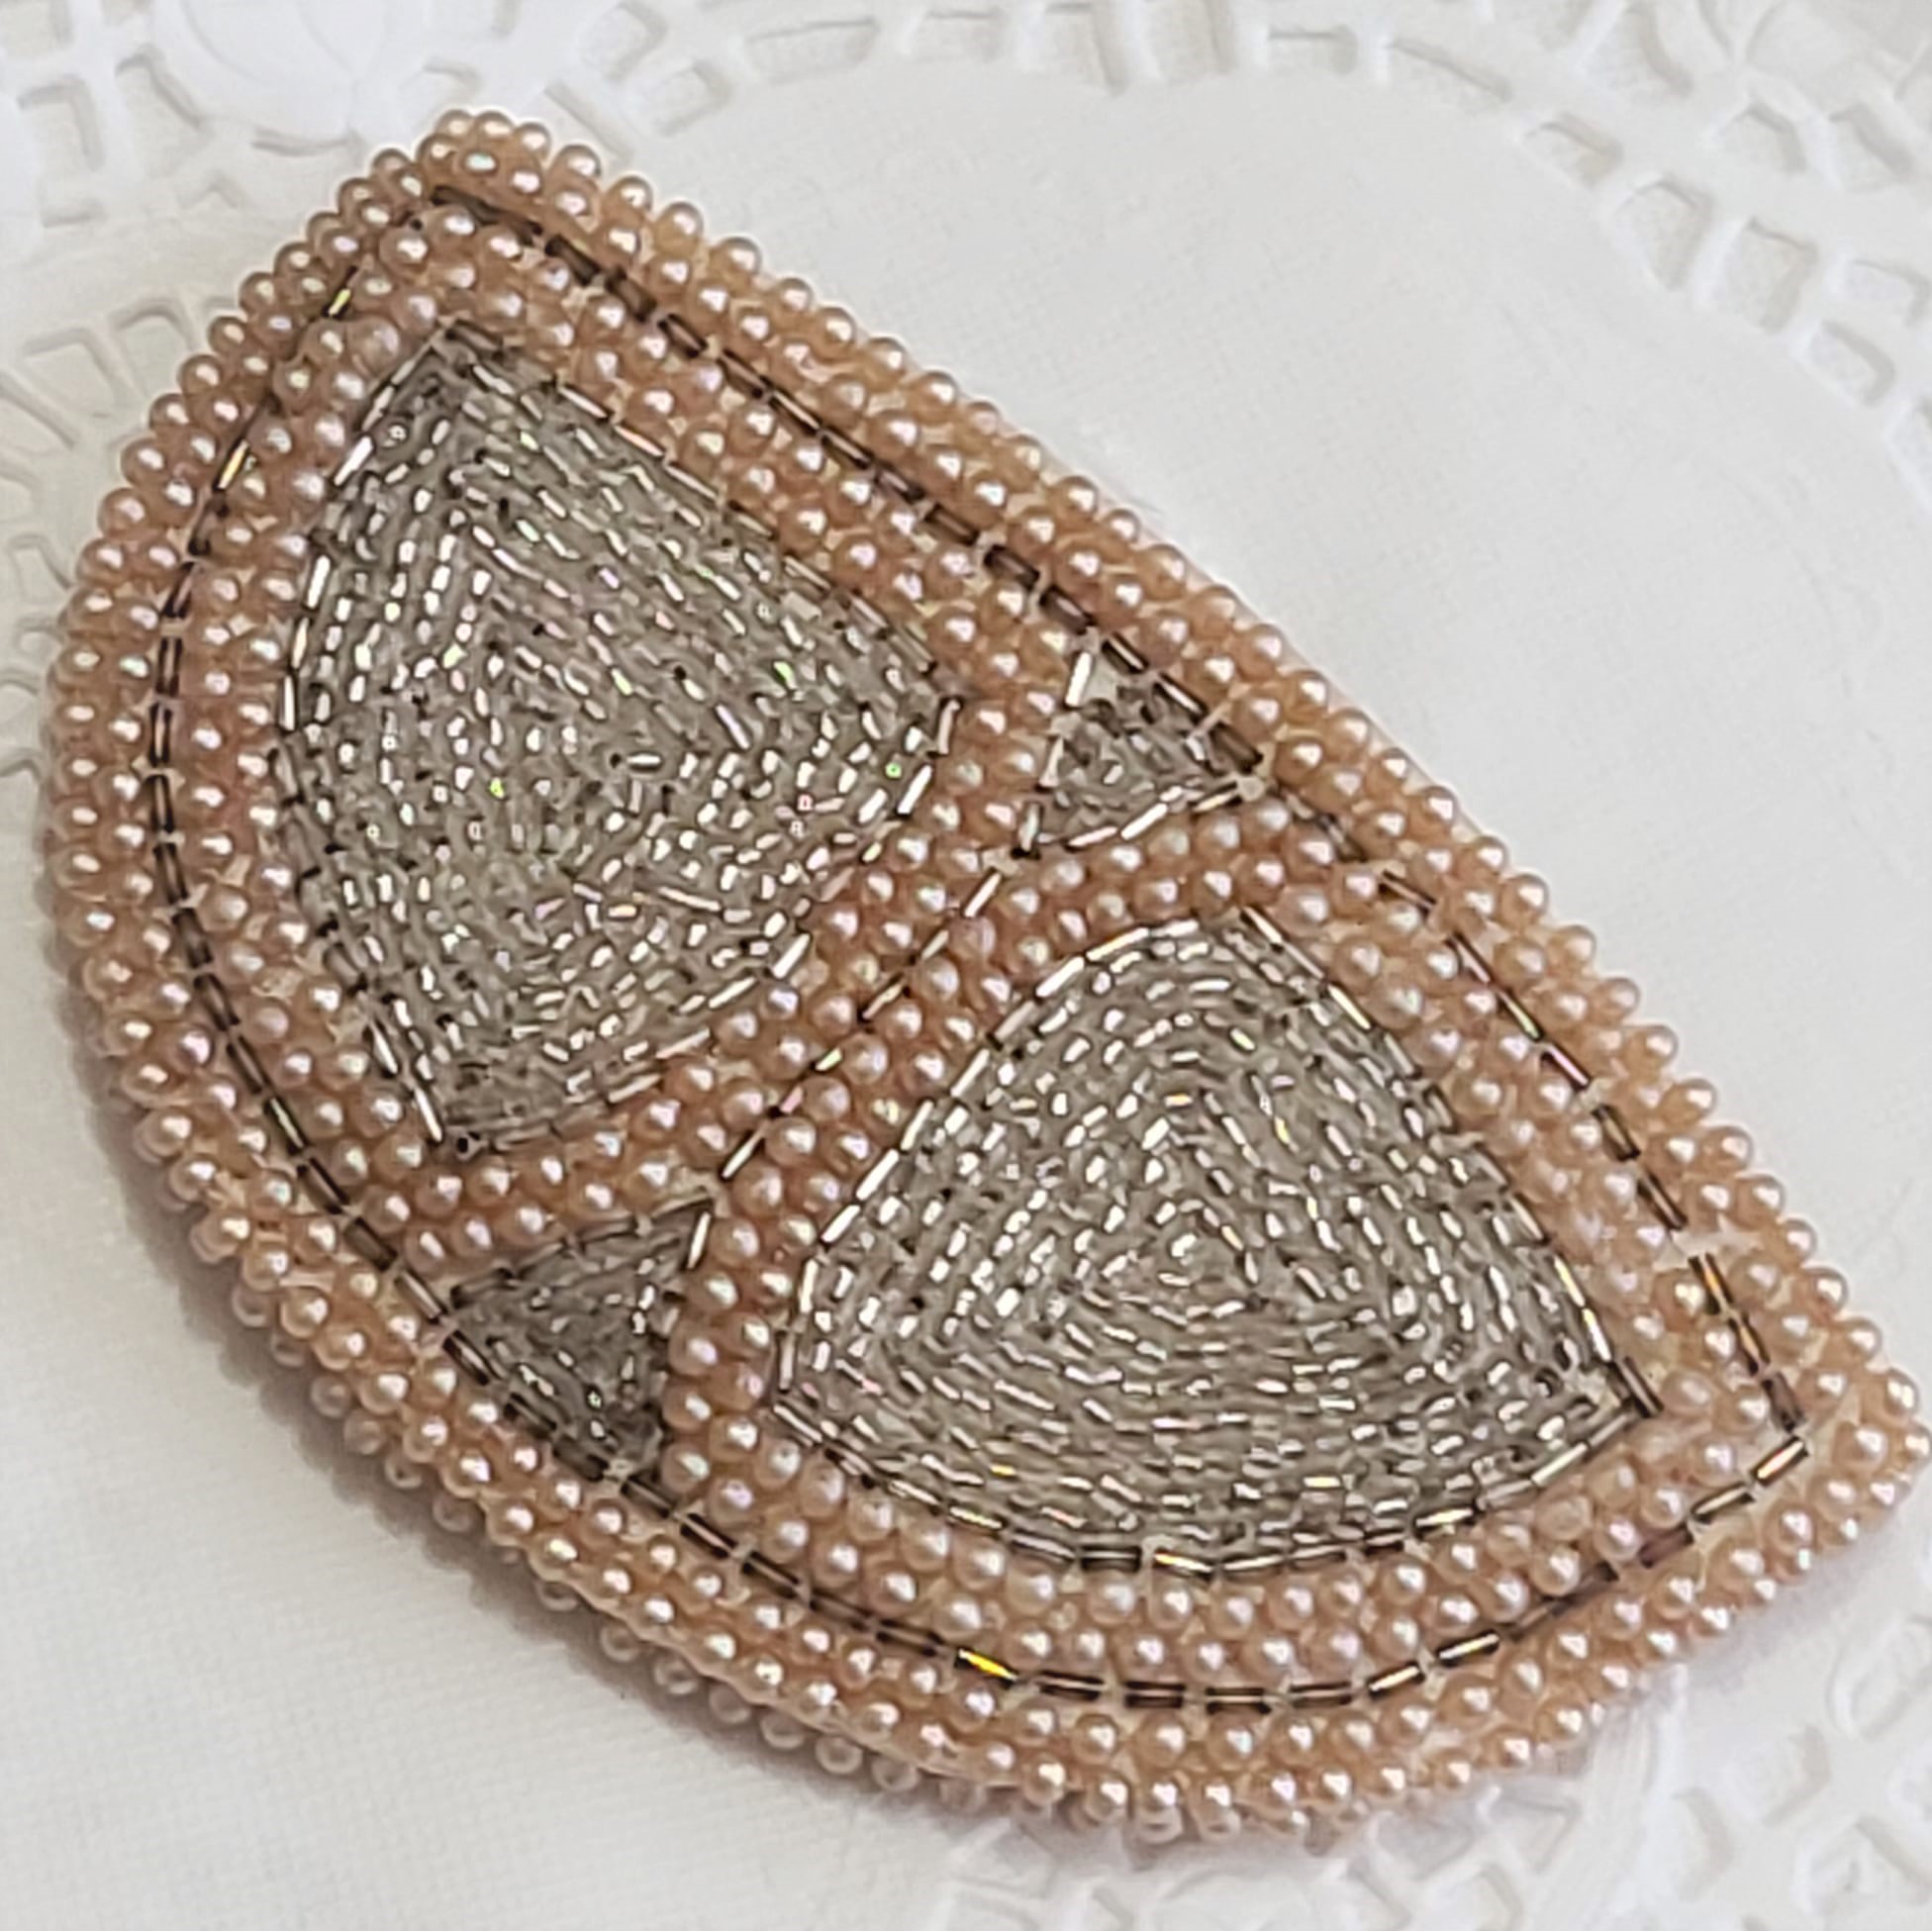 Beads and pearl half circle vintage coin purse